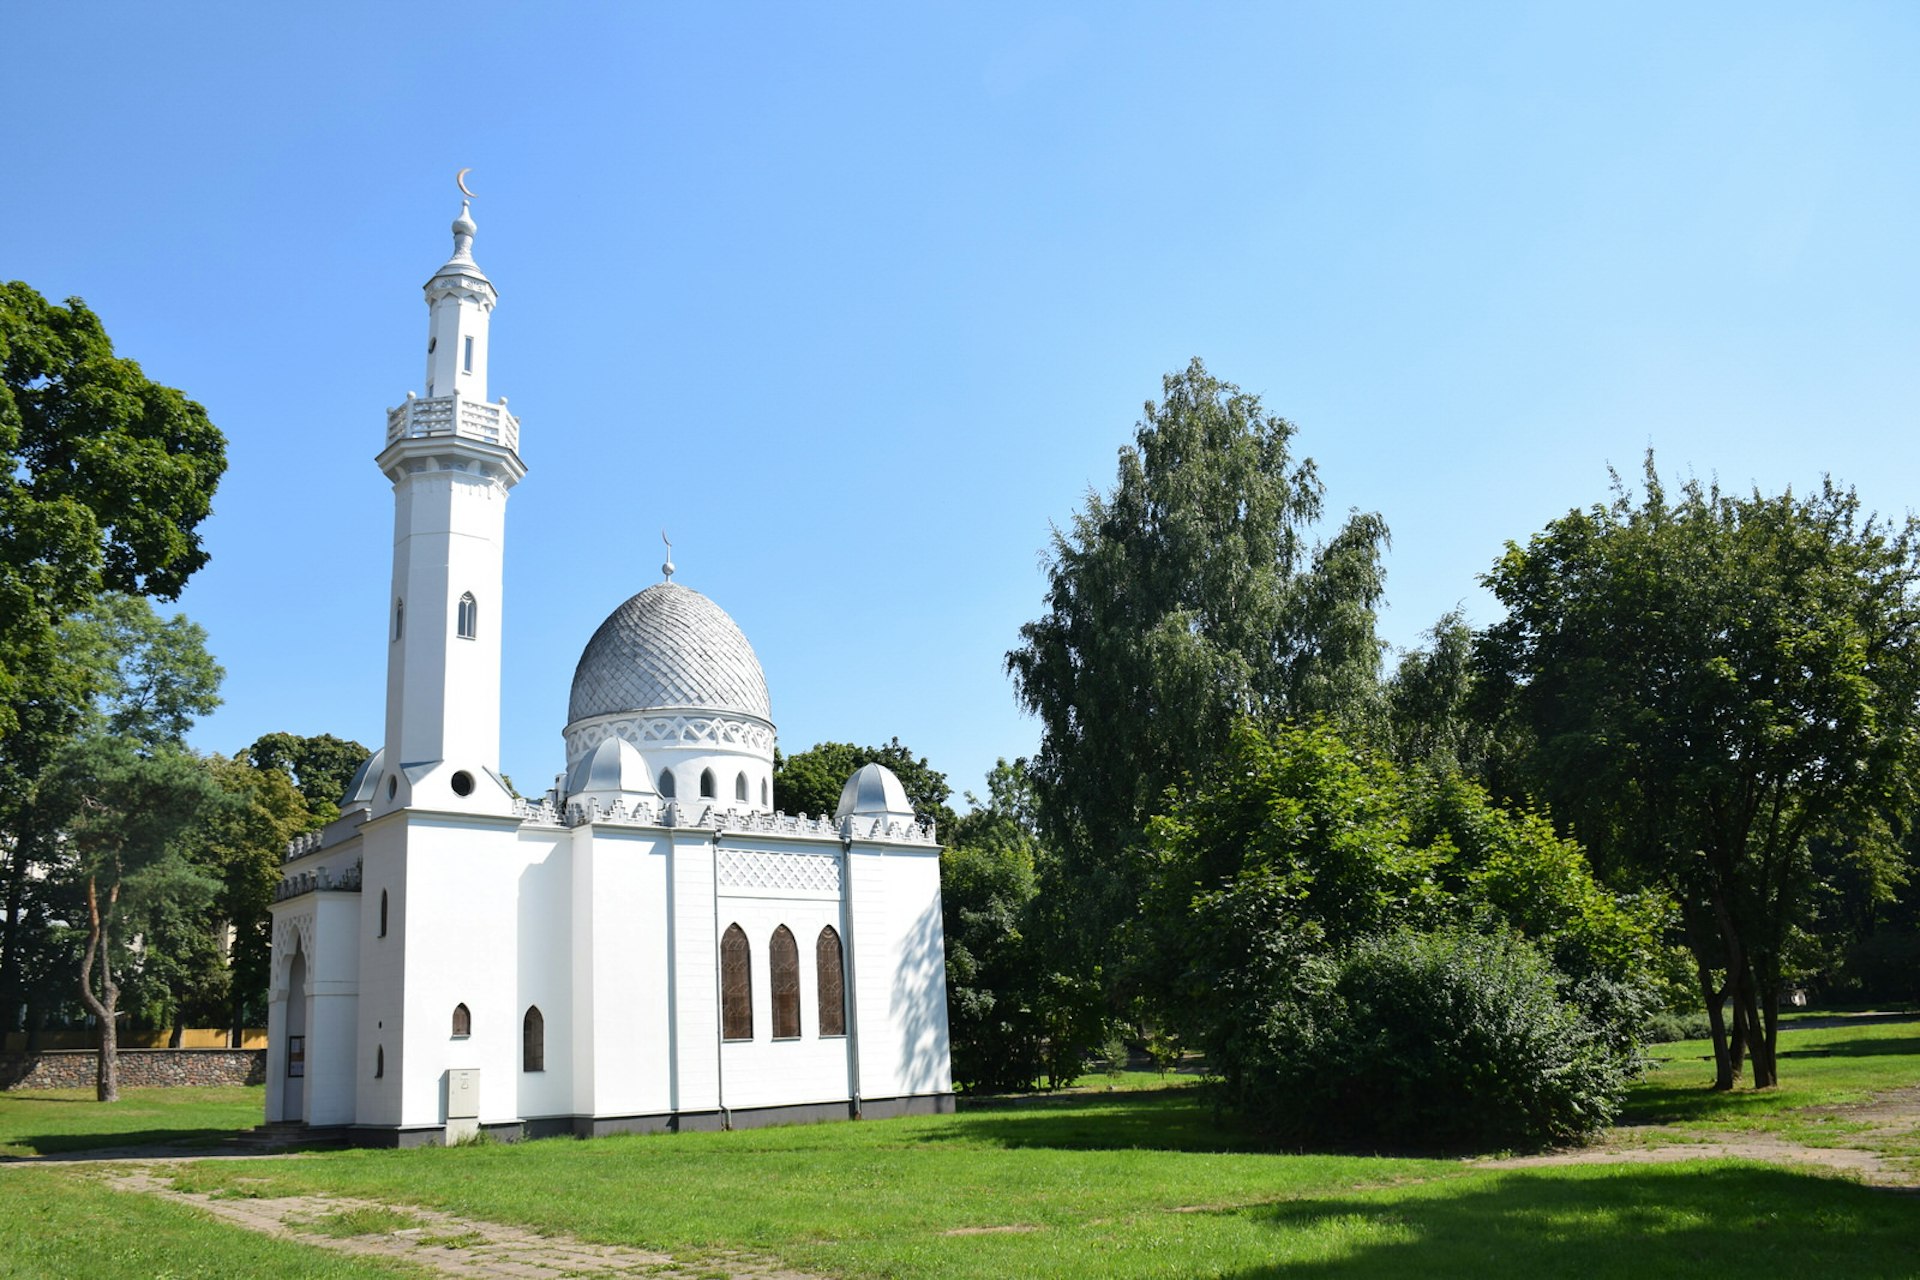 A bright, white mosque with dome and elegant minaret sitting amidst dark green trees